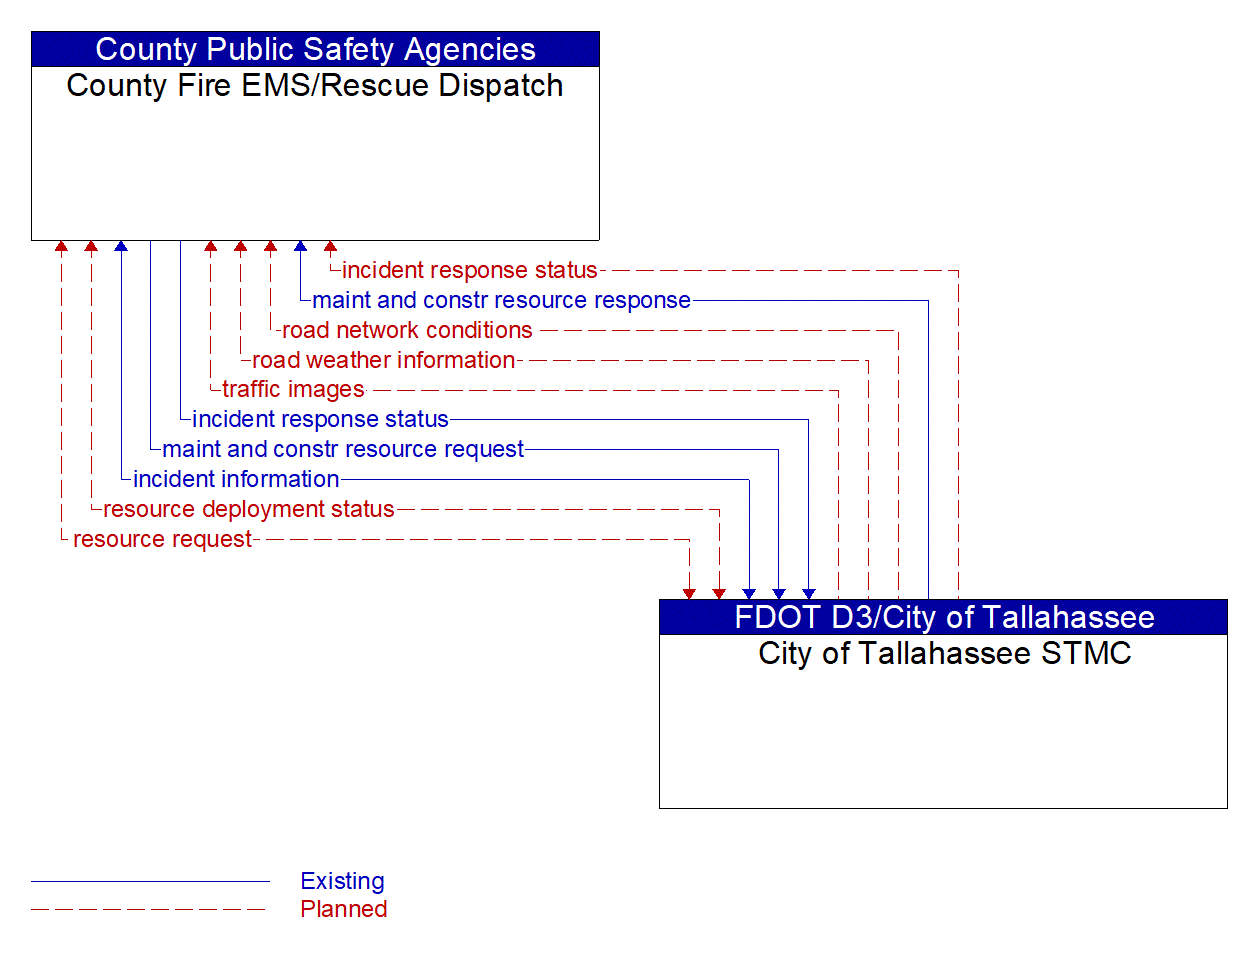 Architecture Flow Diagram: City of Tallahassee STMC <--> County Fire EMS/Rescue Dispatch